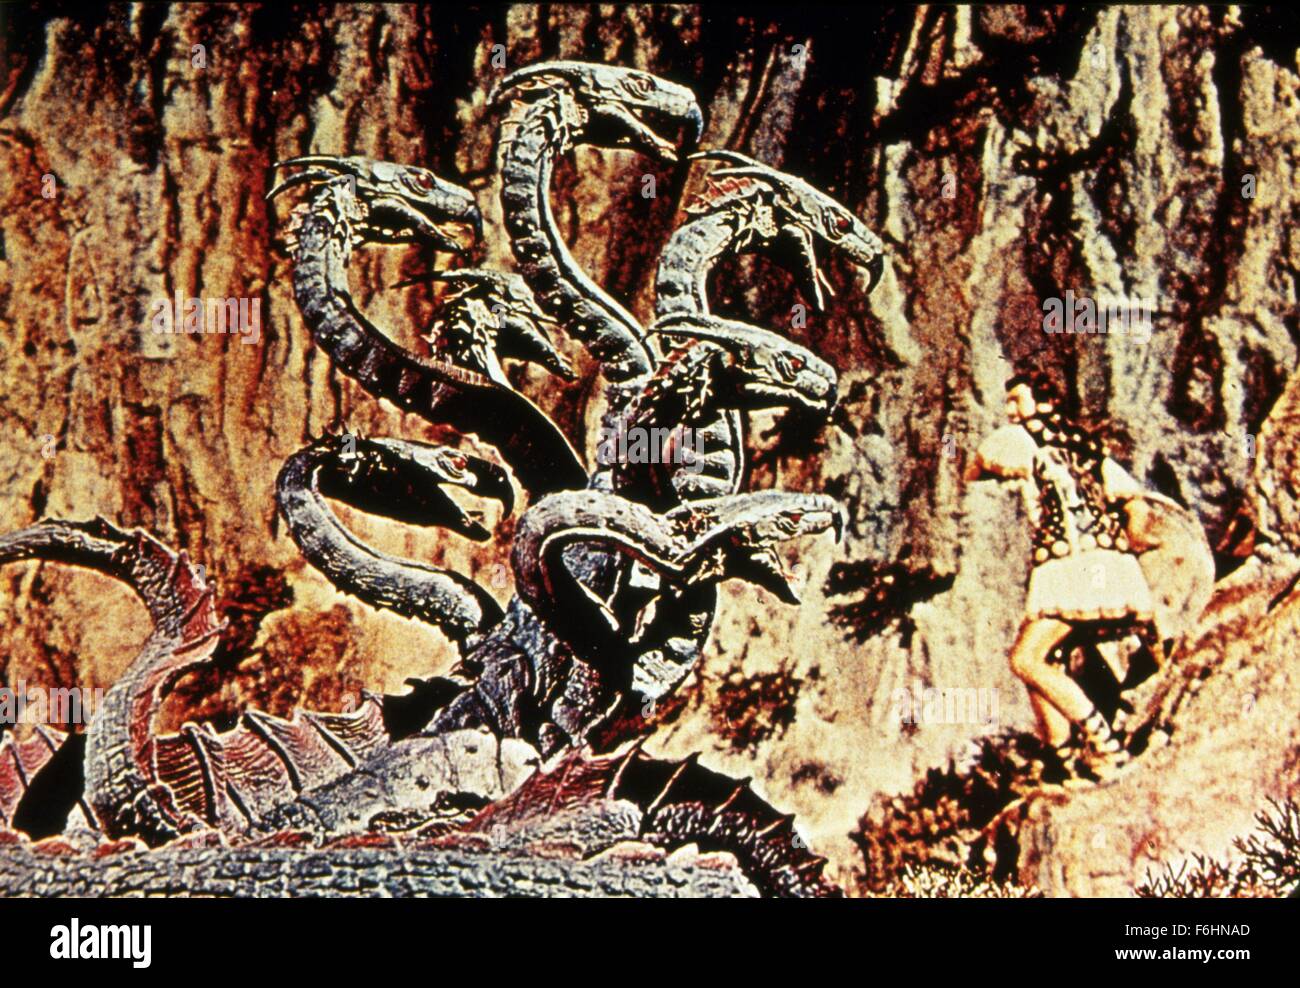 1963, Film Title: JASON AND THE ARGONAUTS, Director: DON CHAFFEY, Studio: COLUMBIA, Pictured: ITS & ALIENS! THINGS, MULTI-HEADED MONSTER, REPTILE, DRAGON, MYTHICAL, PERIOD COSTUME, WARRIOR, SHIELDING, DEFENDING, ATTACKING, BEAST, LIZARD, HORROR, GOLDEN FLEECE, ADVENTURE, SCORE BY BERNARD HERRMANN. (Credit Image: SNAP) Stock Photo